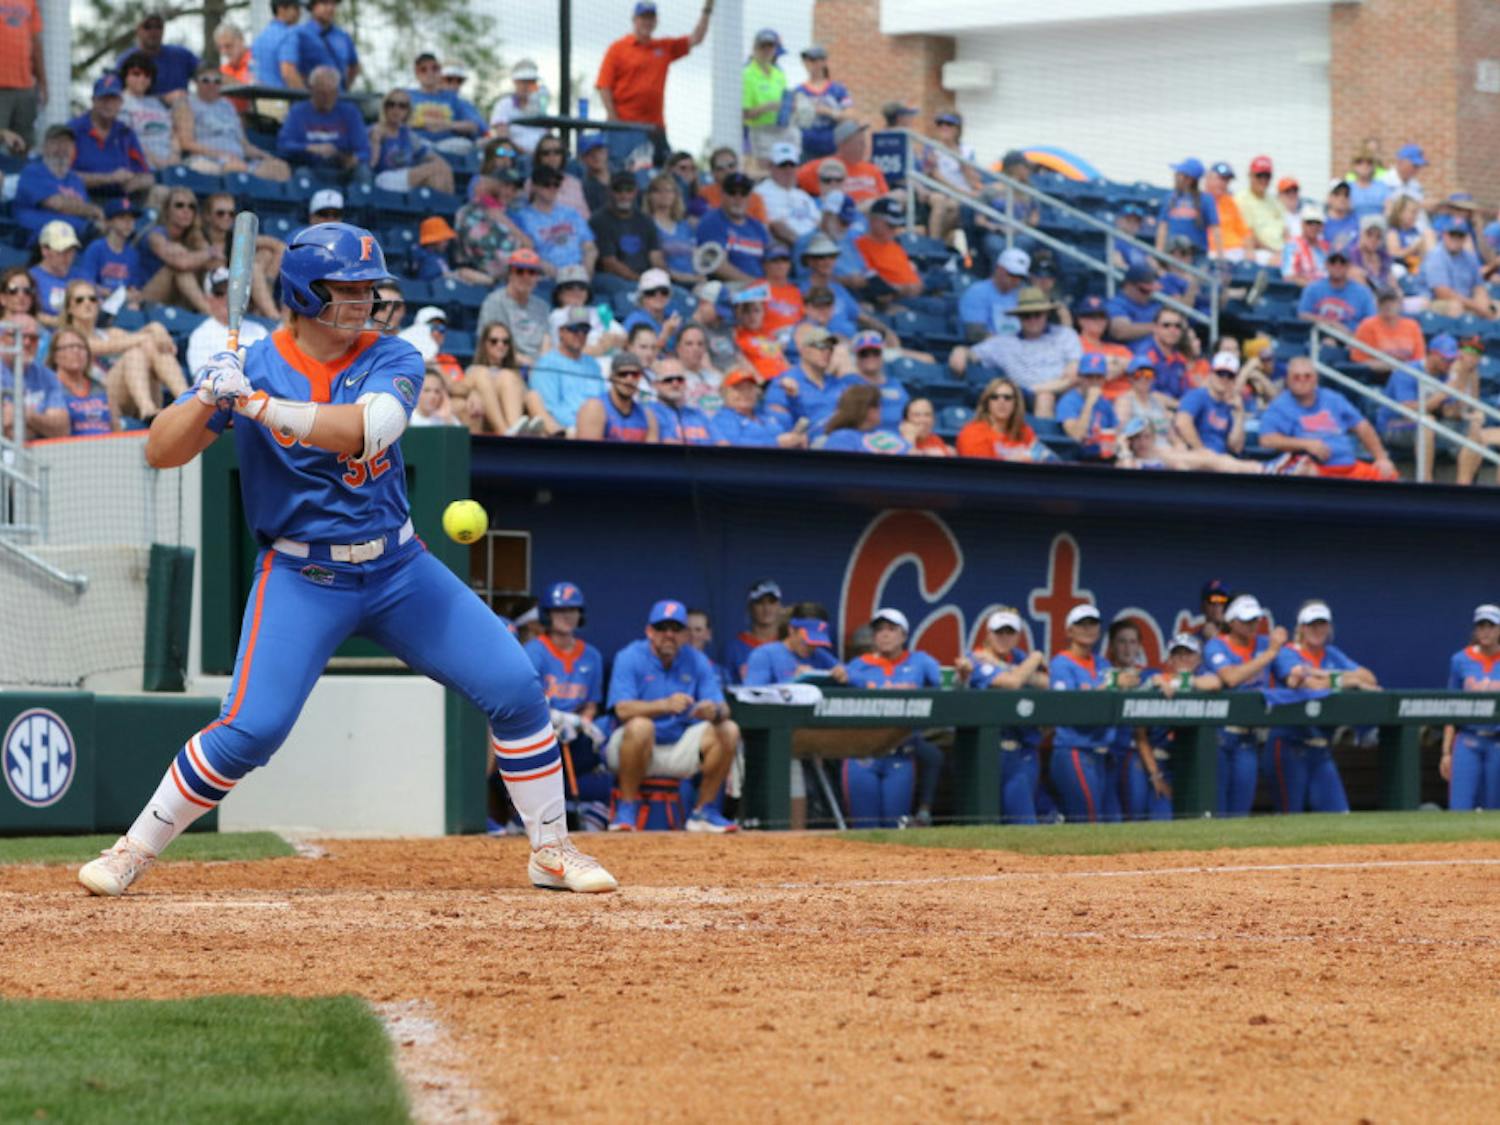 Junior Kendyl Lindaman went 5 for 9 at the plate with two home runs and six RBI's in the Gators series against LSU.